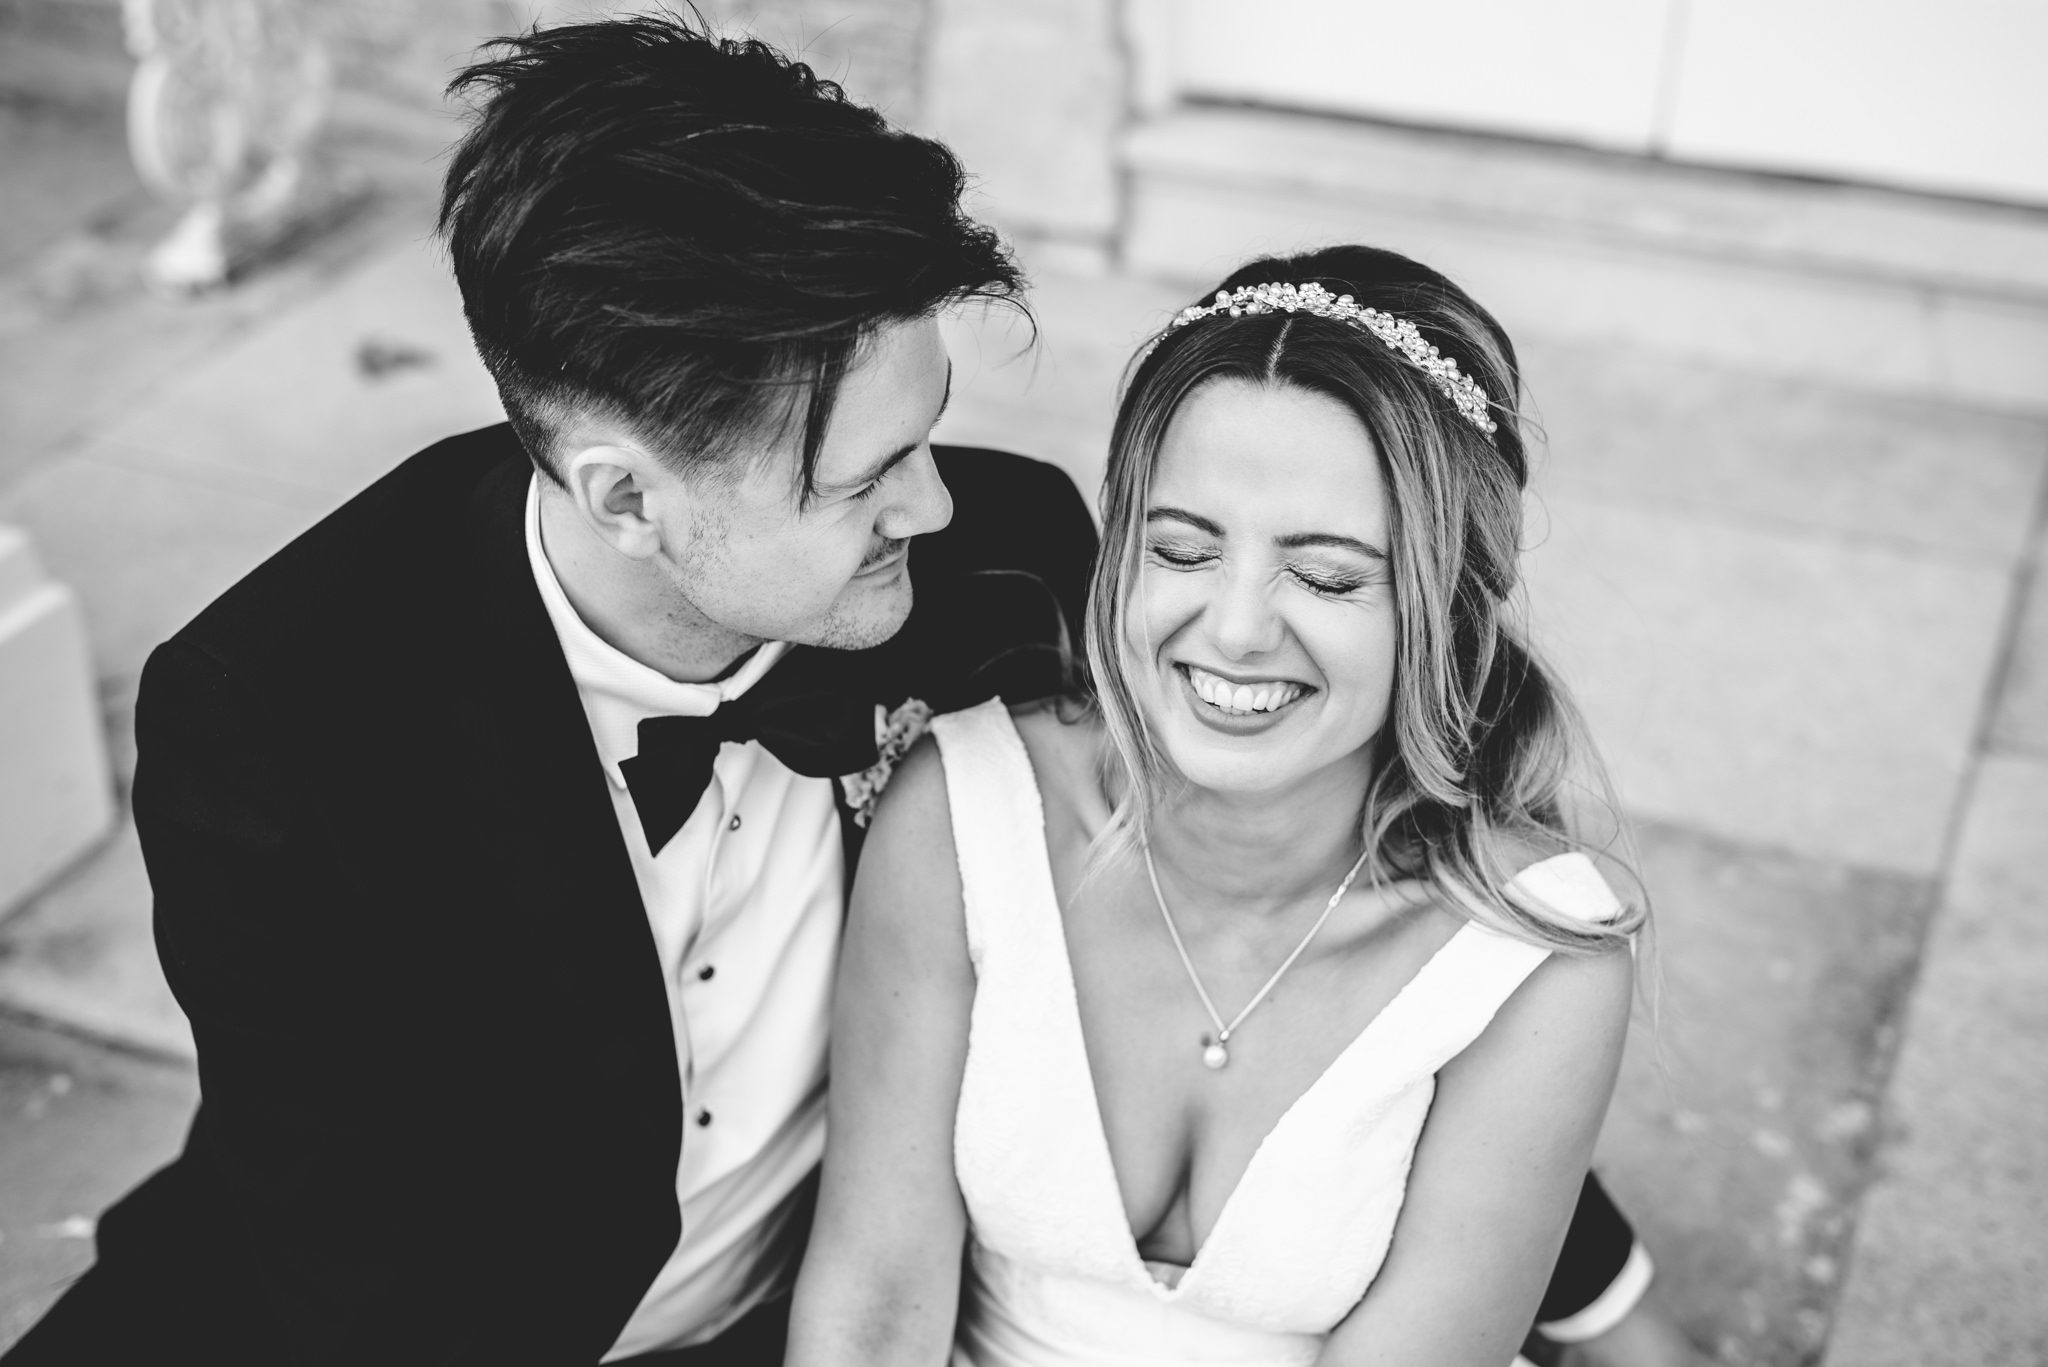 A bride and groom laughing at their wedding day